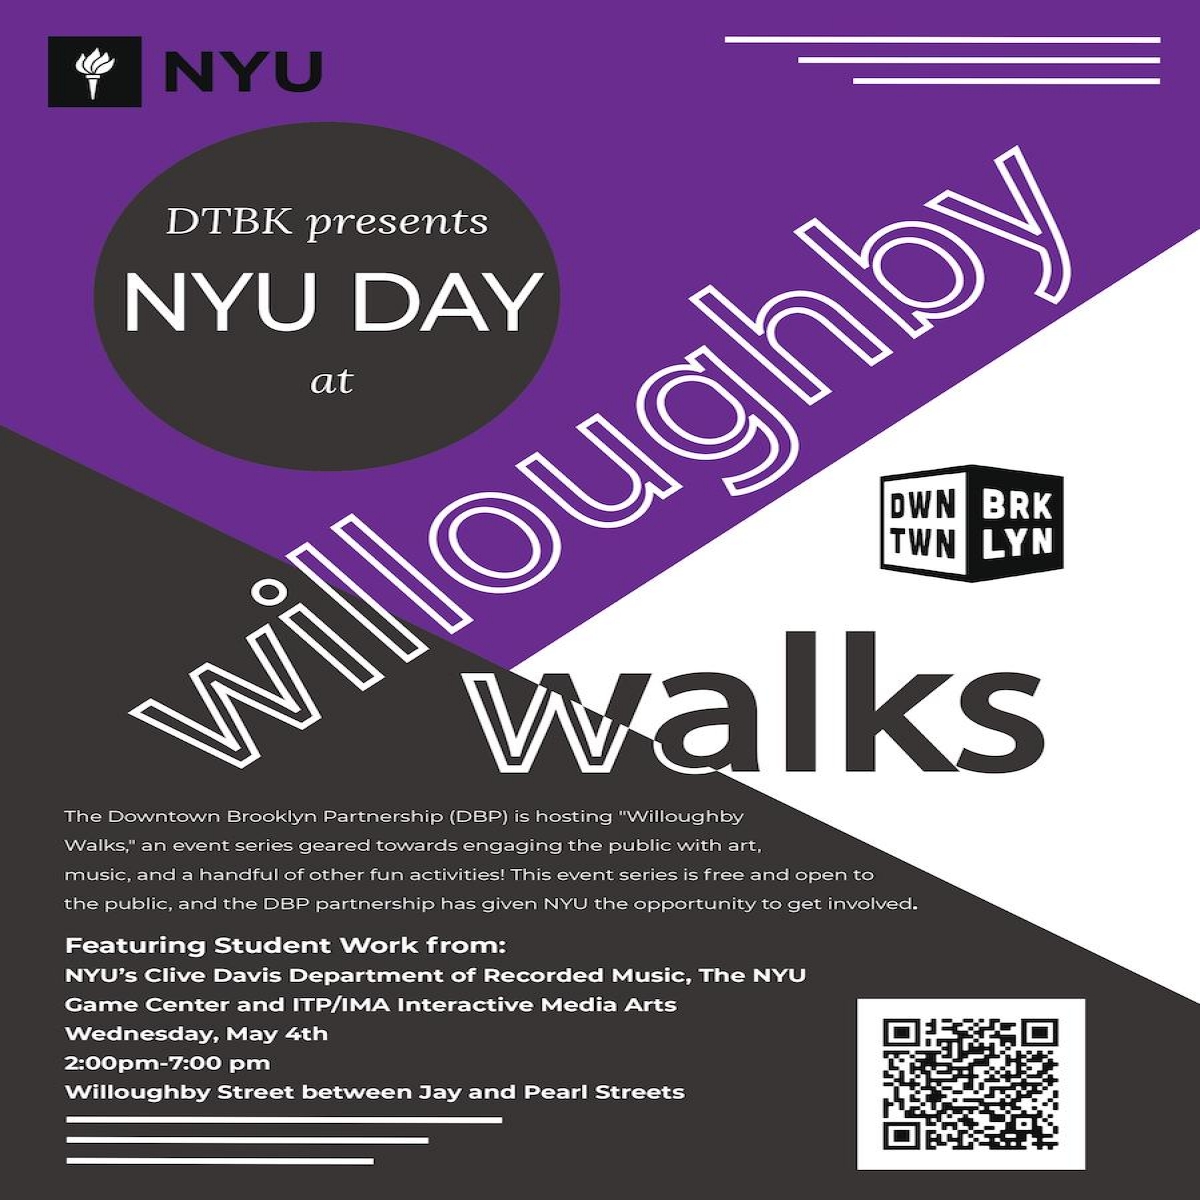 The Willoughby Walks: NYU Day event will be held on Wednesday, May 4th from 2:00pm - 7:00pm